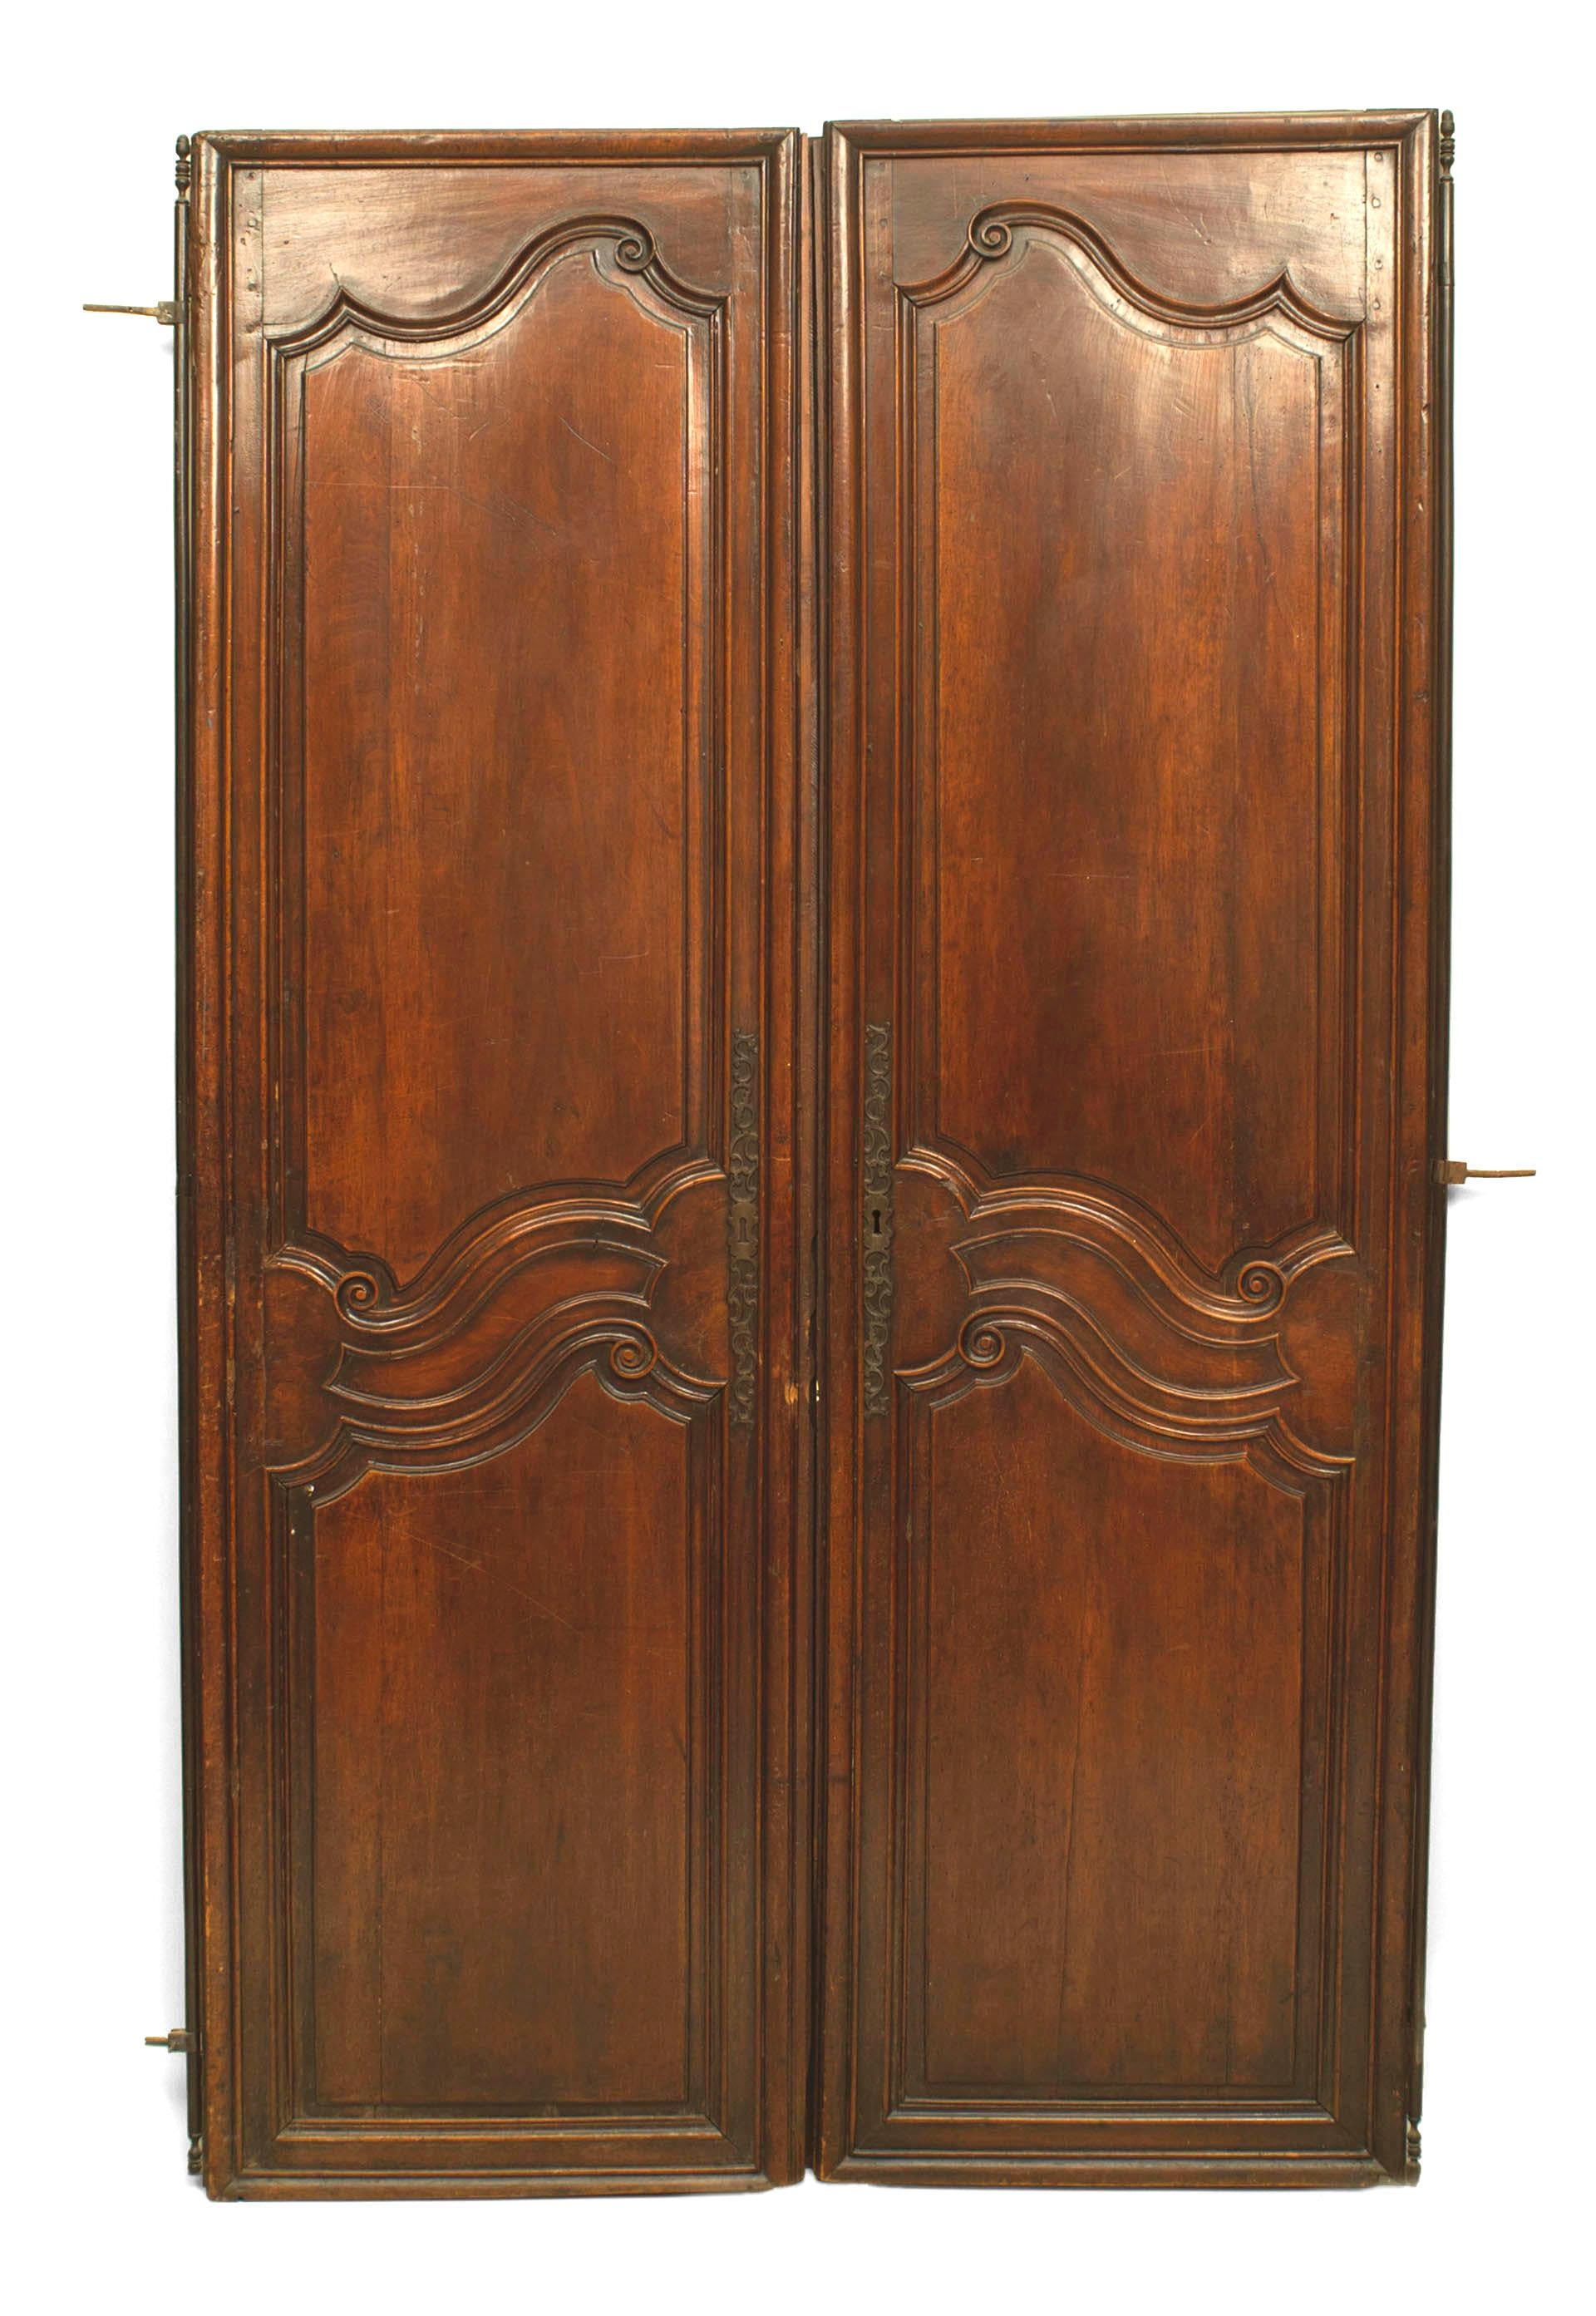 Pair of French Provincial (18th Century) walnut doors with 2 panels with scroll carving and wrought iron hardware (PRICED AS Pair).
